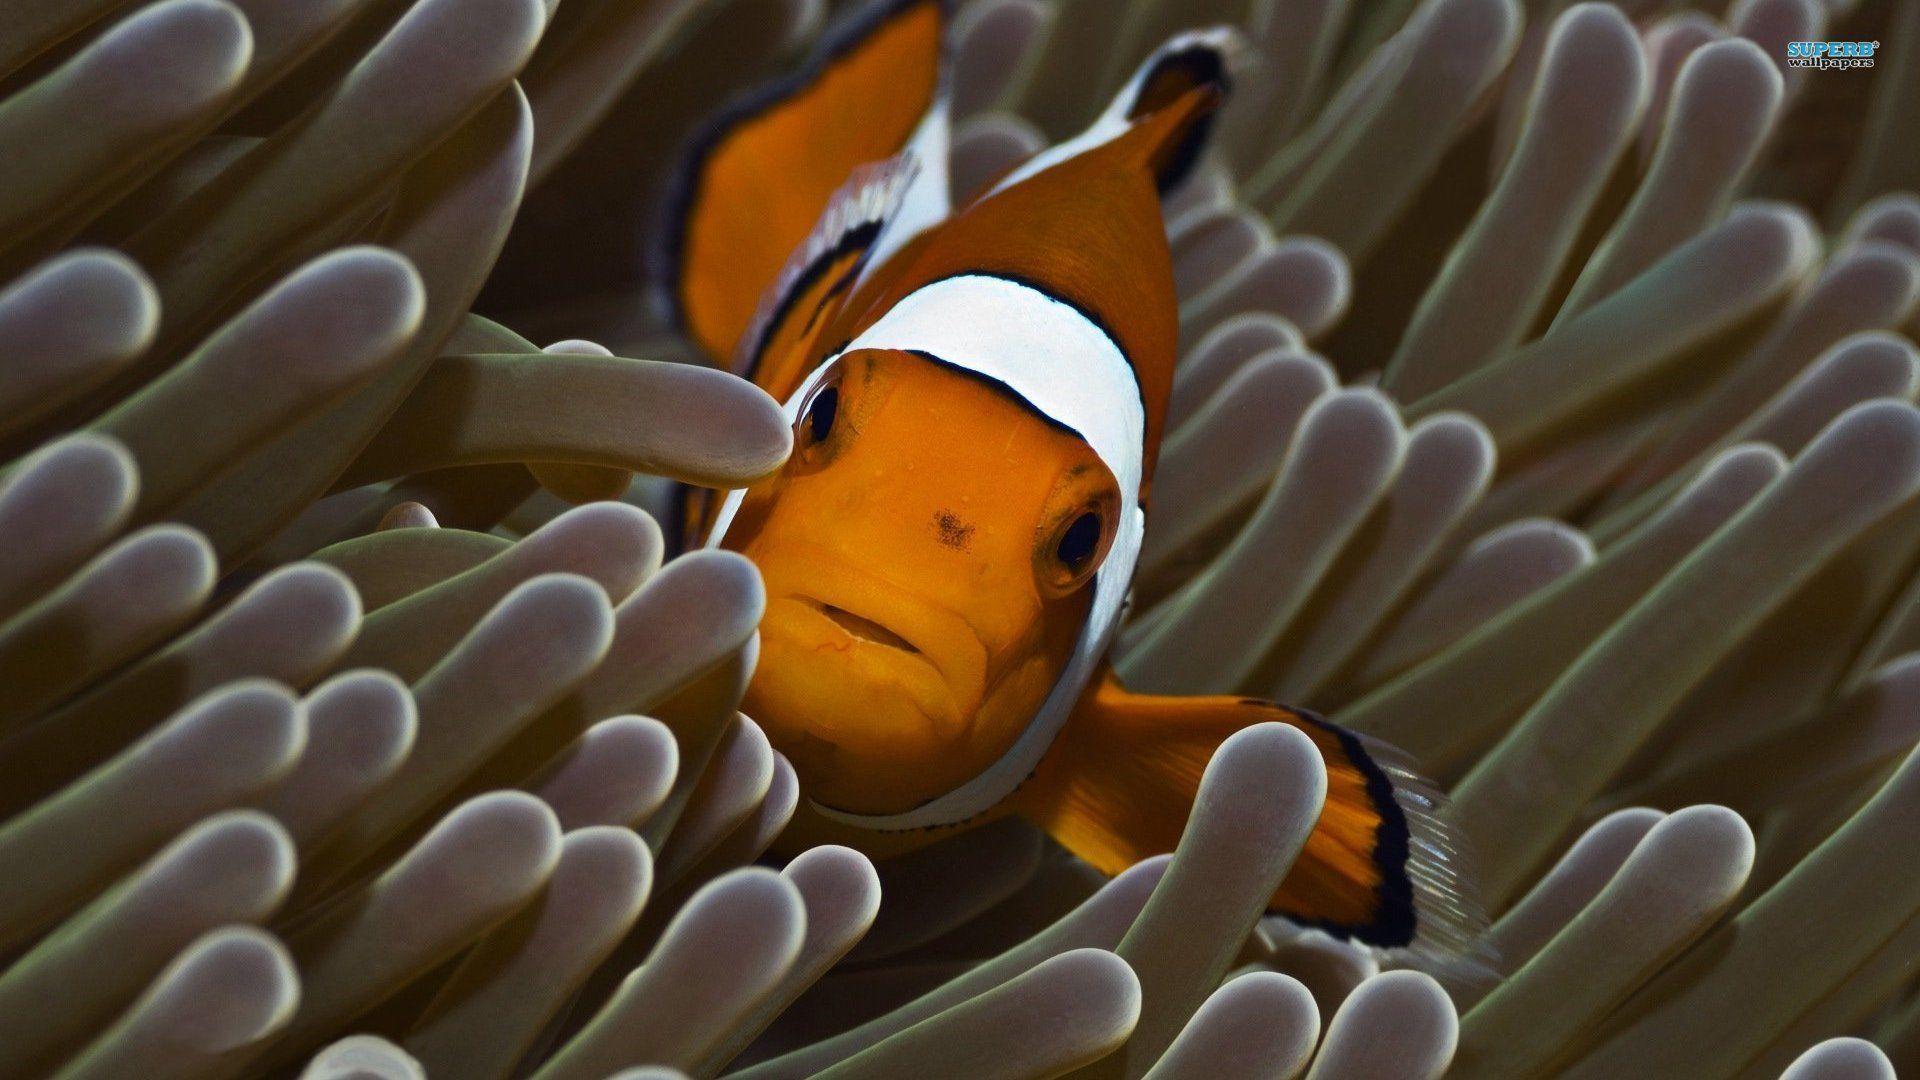 Clown Fish Background Picture For iPad. Fish, Picture, Fish